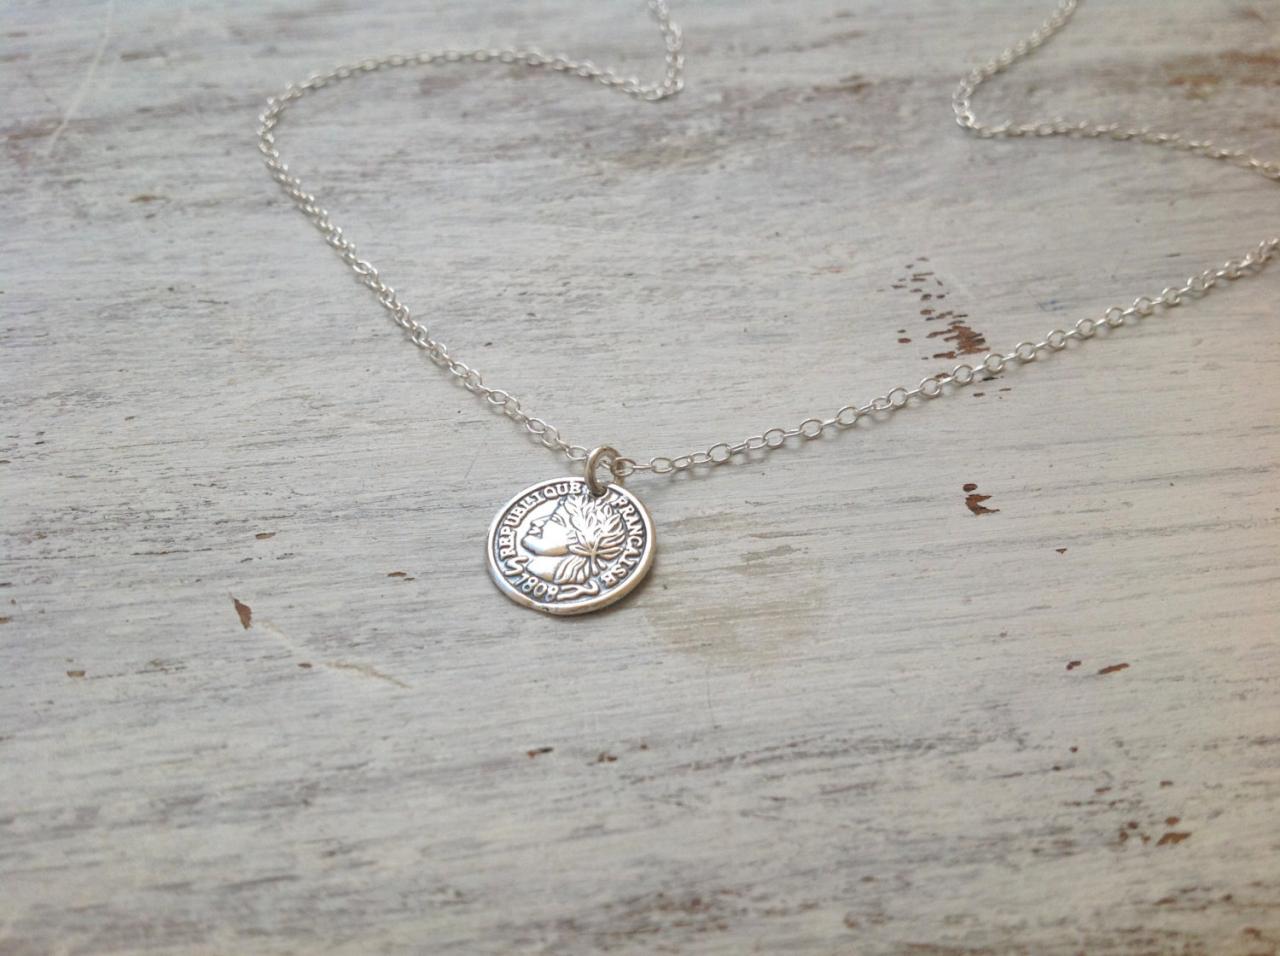 Silver Necklace, Silver Coin Necklace, Coin Jewelry, Delicate Necklace, Dainty Necklace, Silver Disc, Side Way Coin, Gold Filled - 801